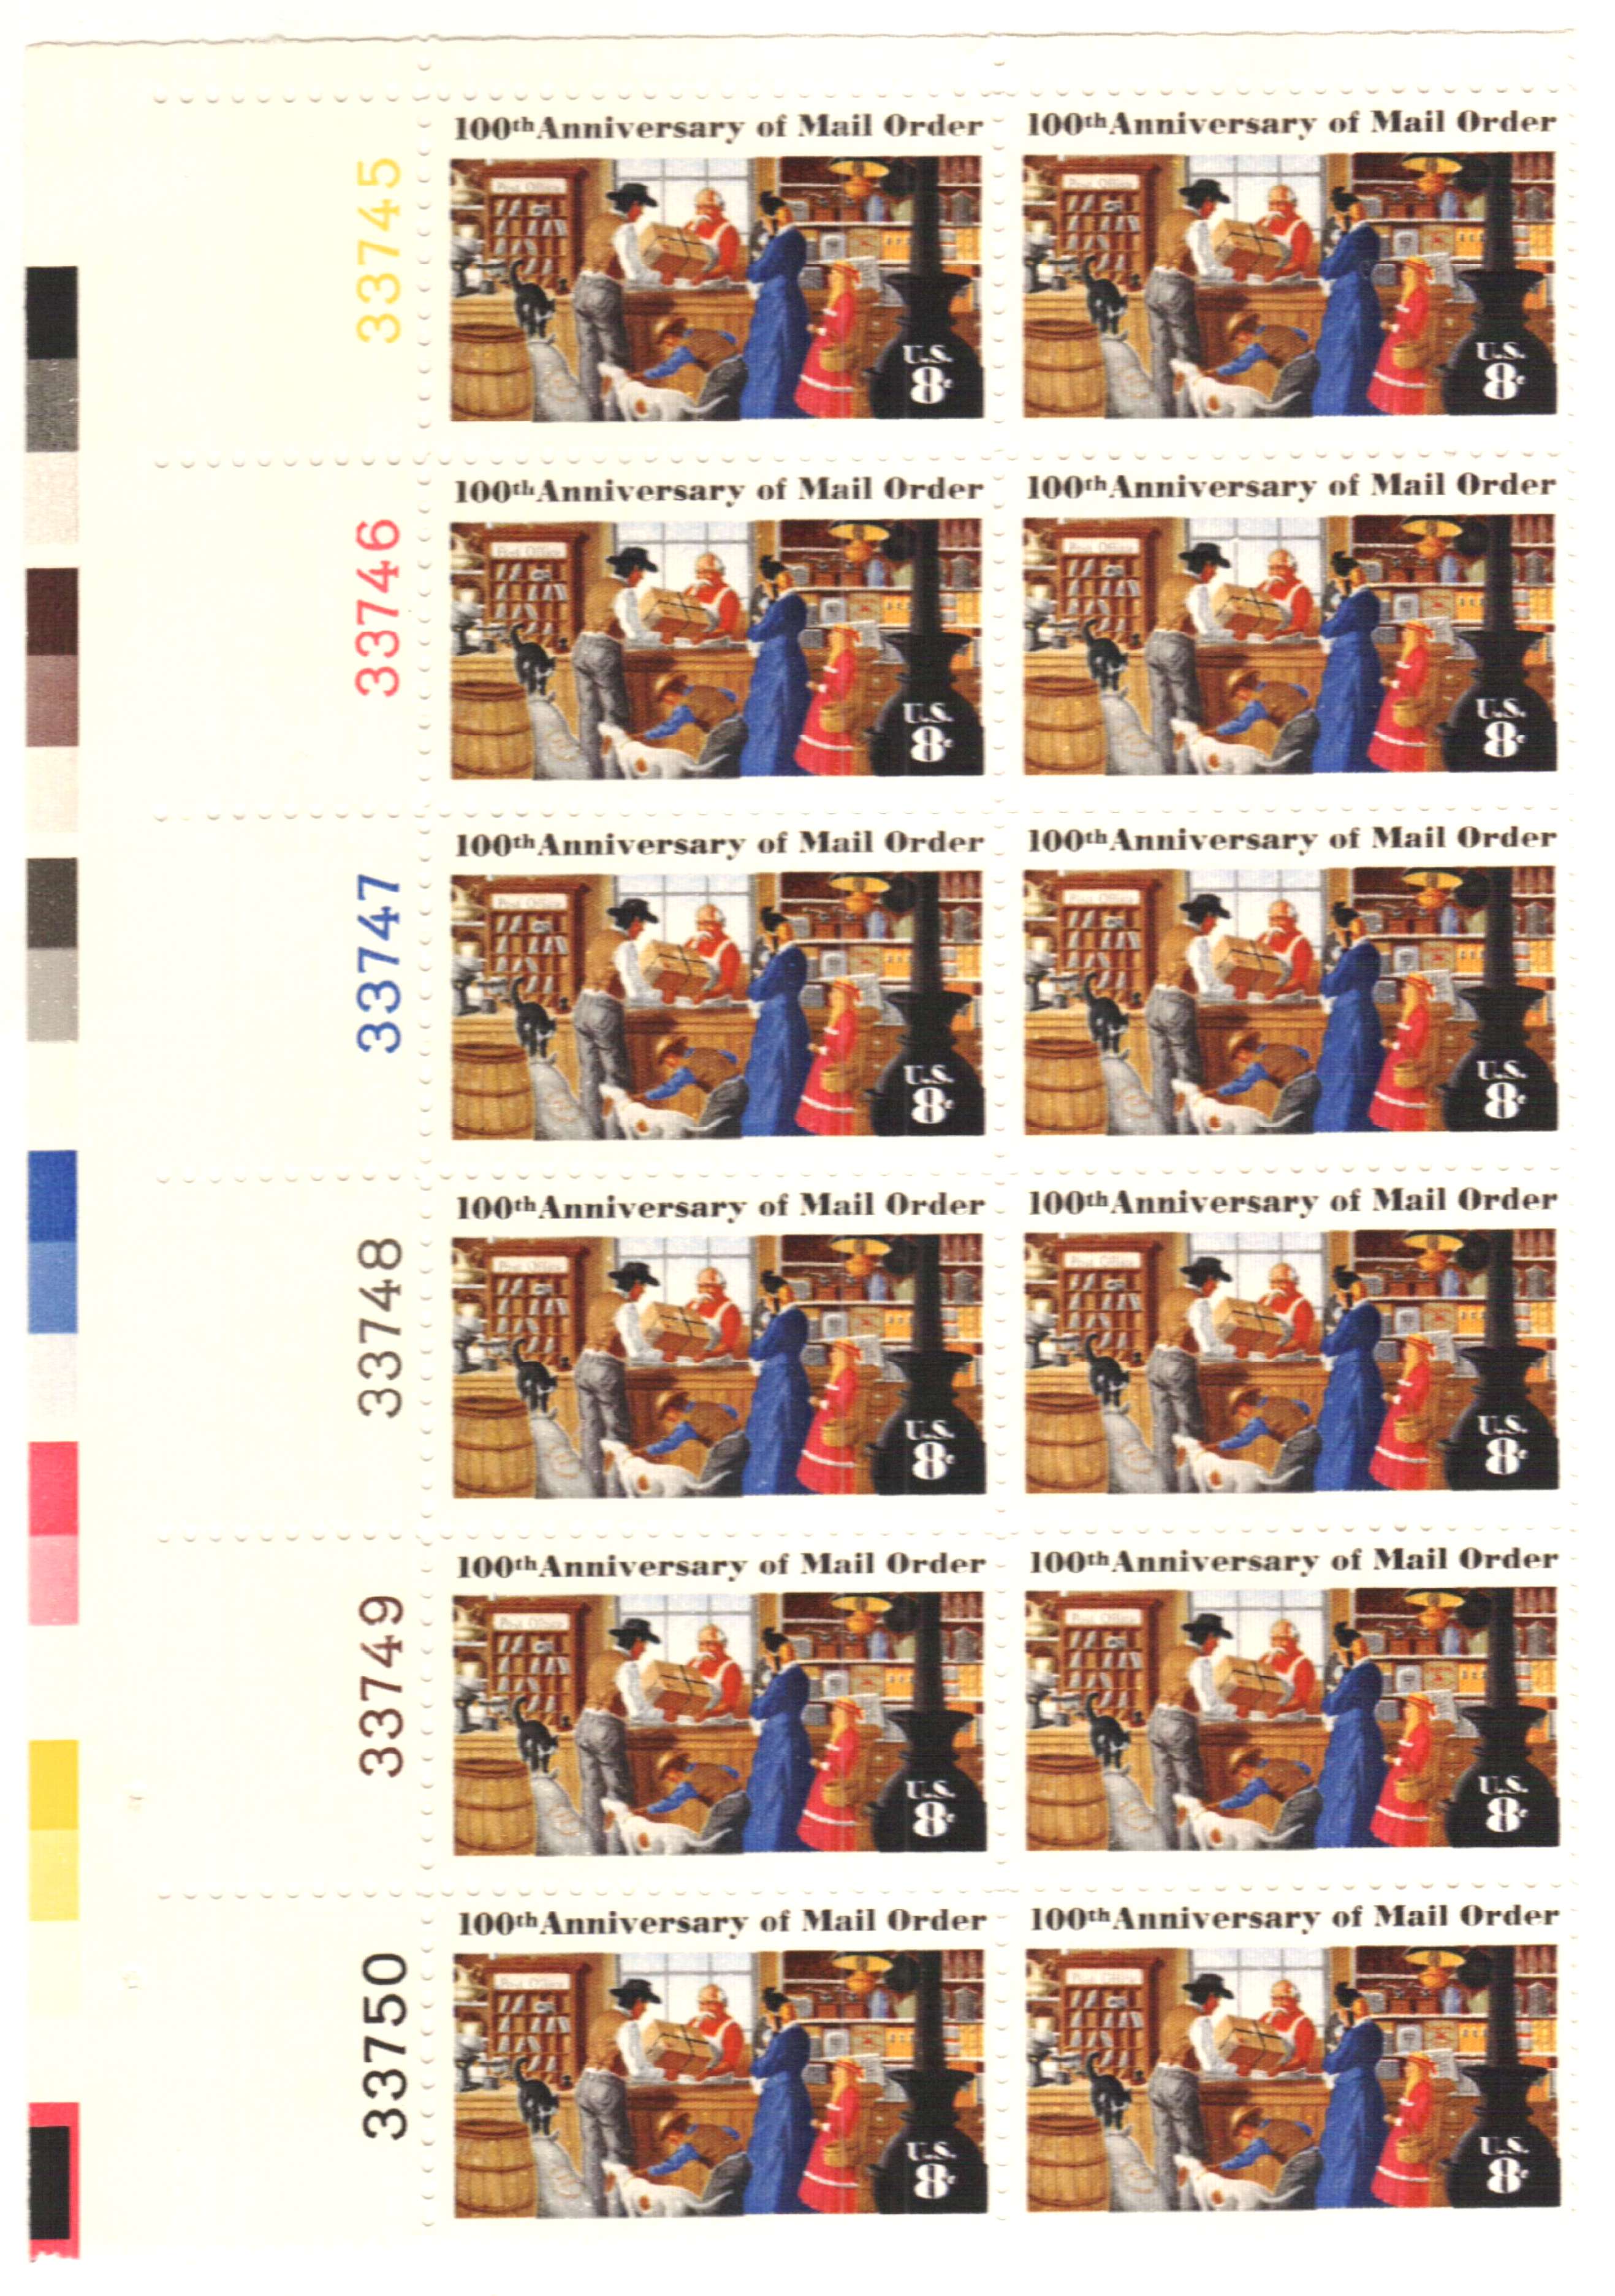 1972 100th Anniversary of Mail Order Business - Single 8c Postage Stamp -  Sc# 1468 - MNH,OG